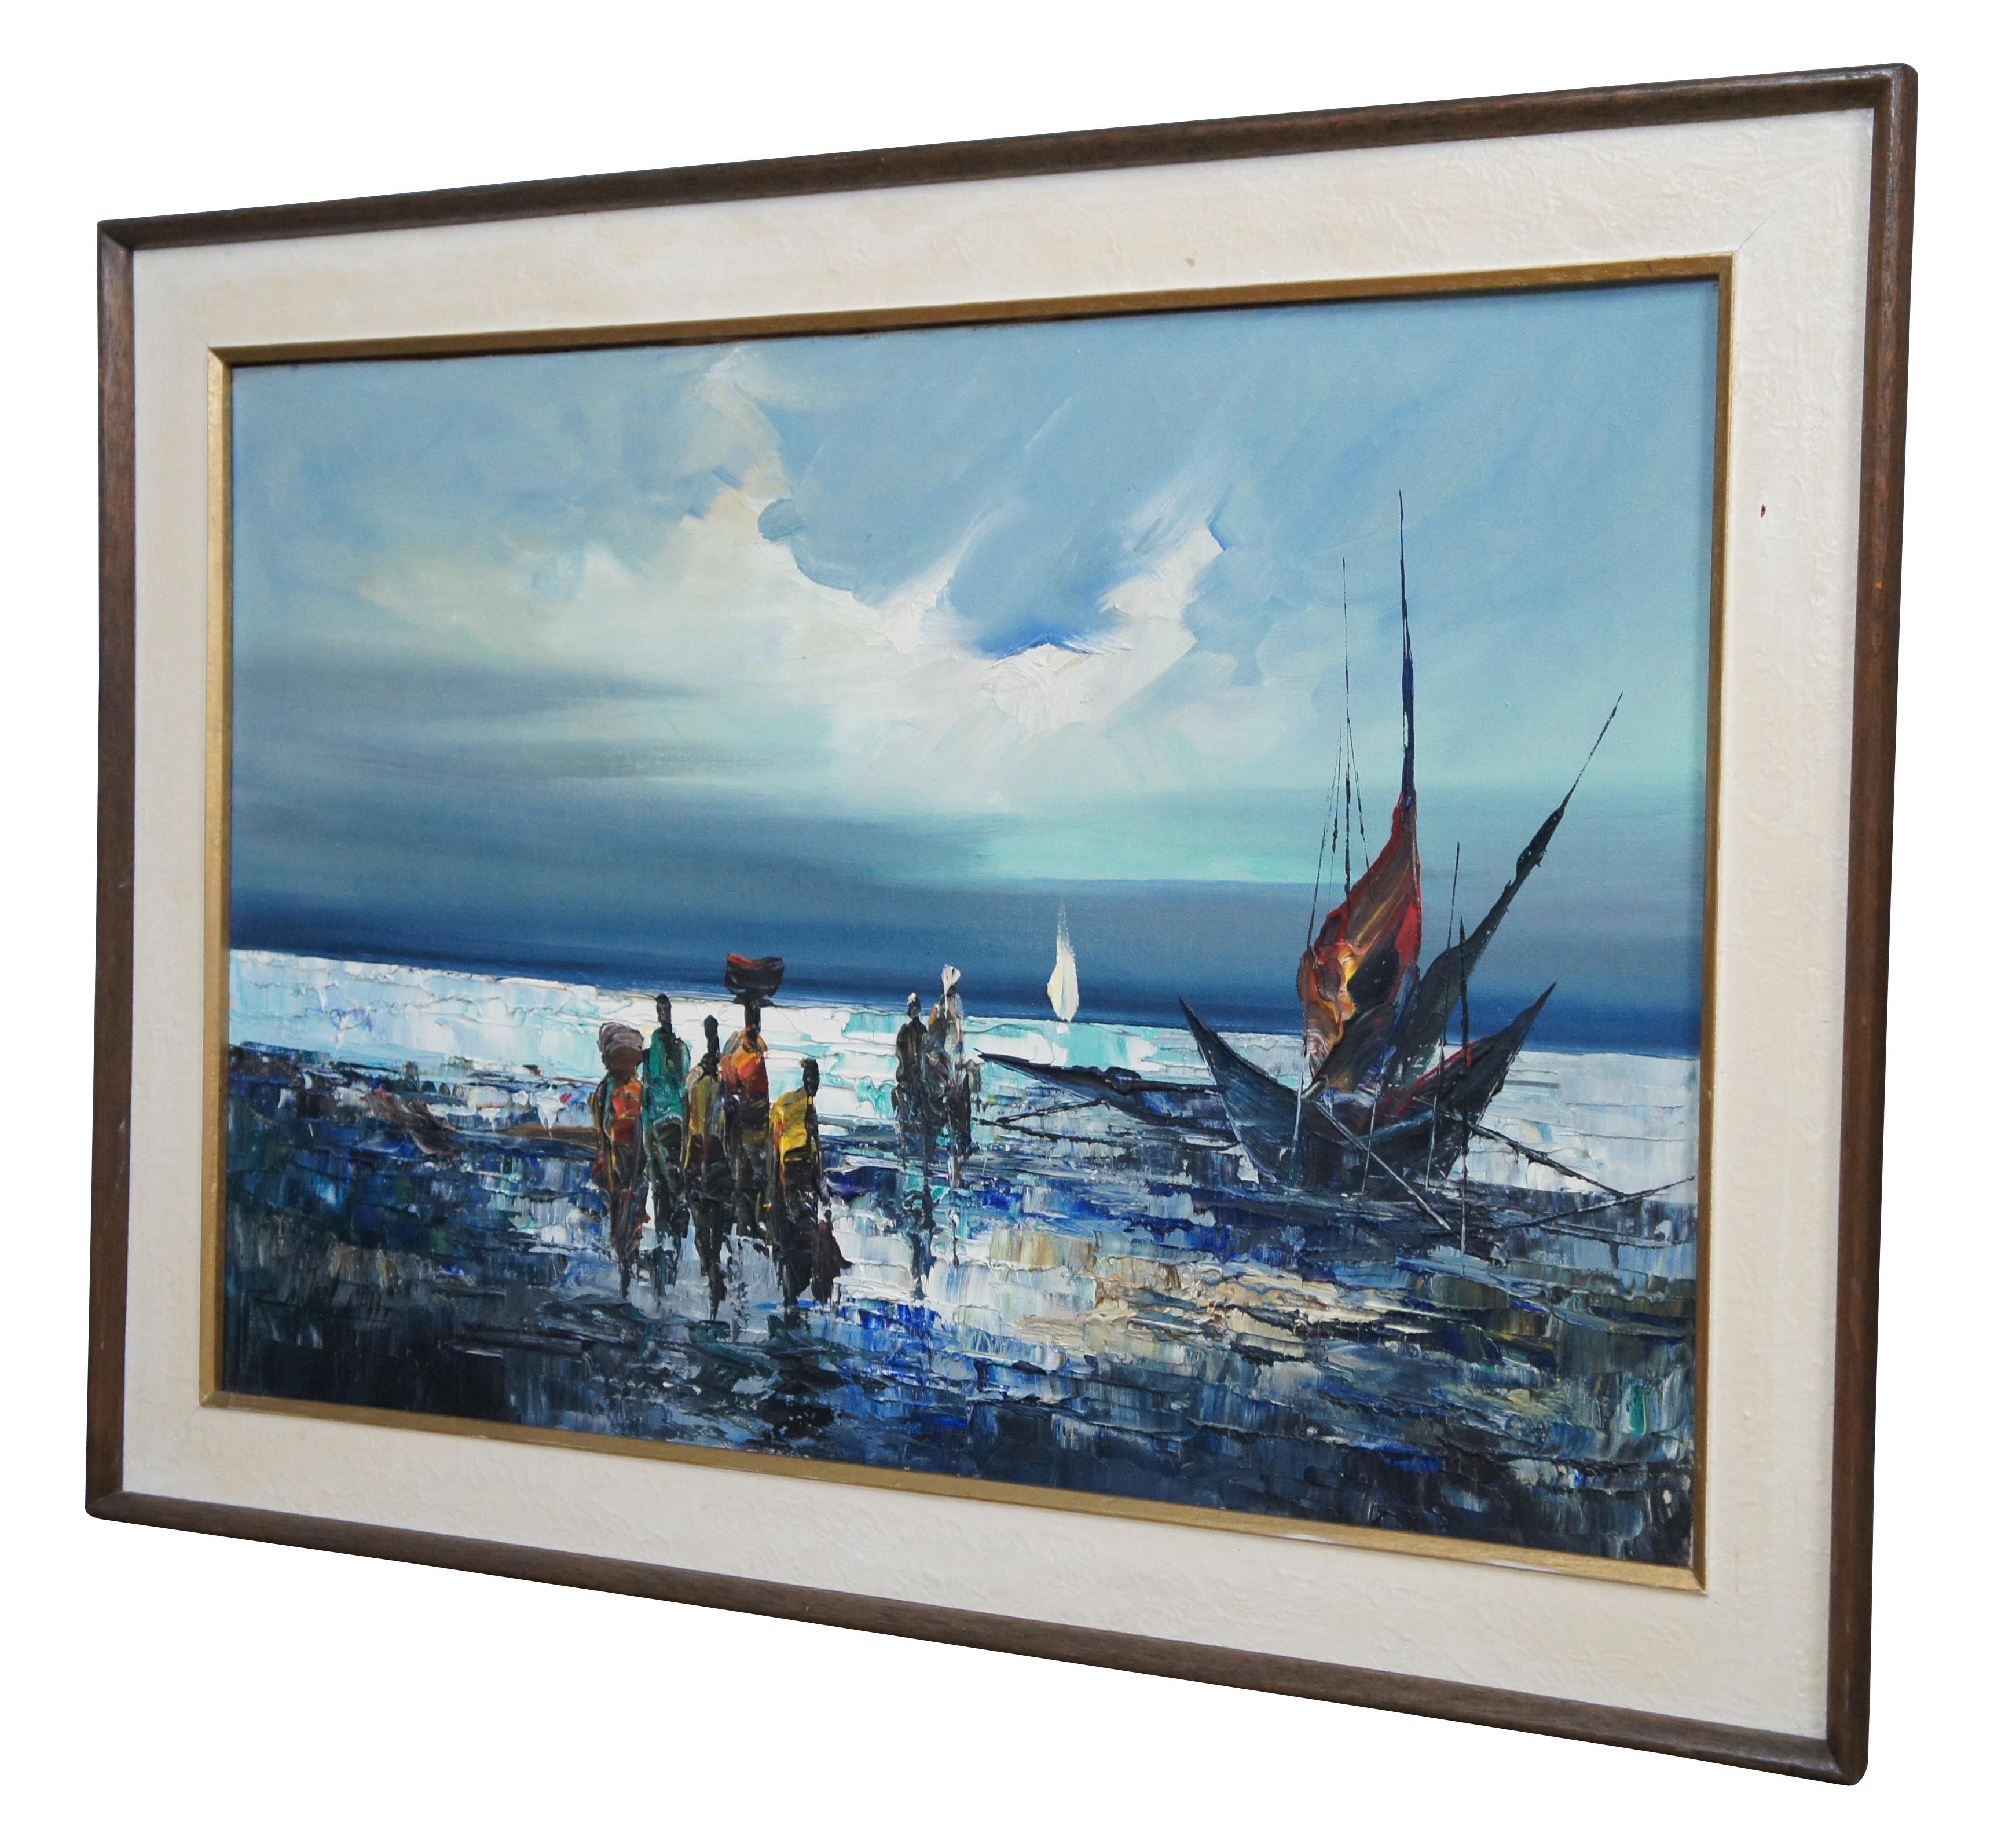 Vintage impressionist nautical / maritime / seascape oil painting on canvas showing African figures in bright clothing, with bundles on their heads, walking through the waves from a small sailboat / boat. Signed lower right.

Provenance:
Estate